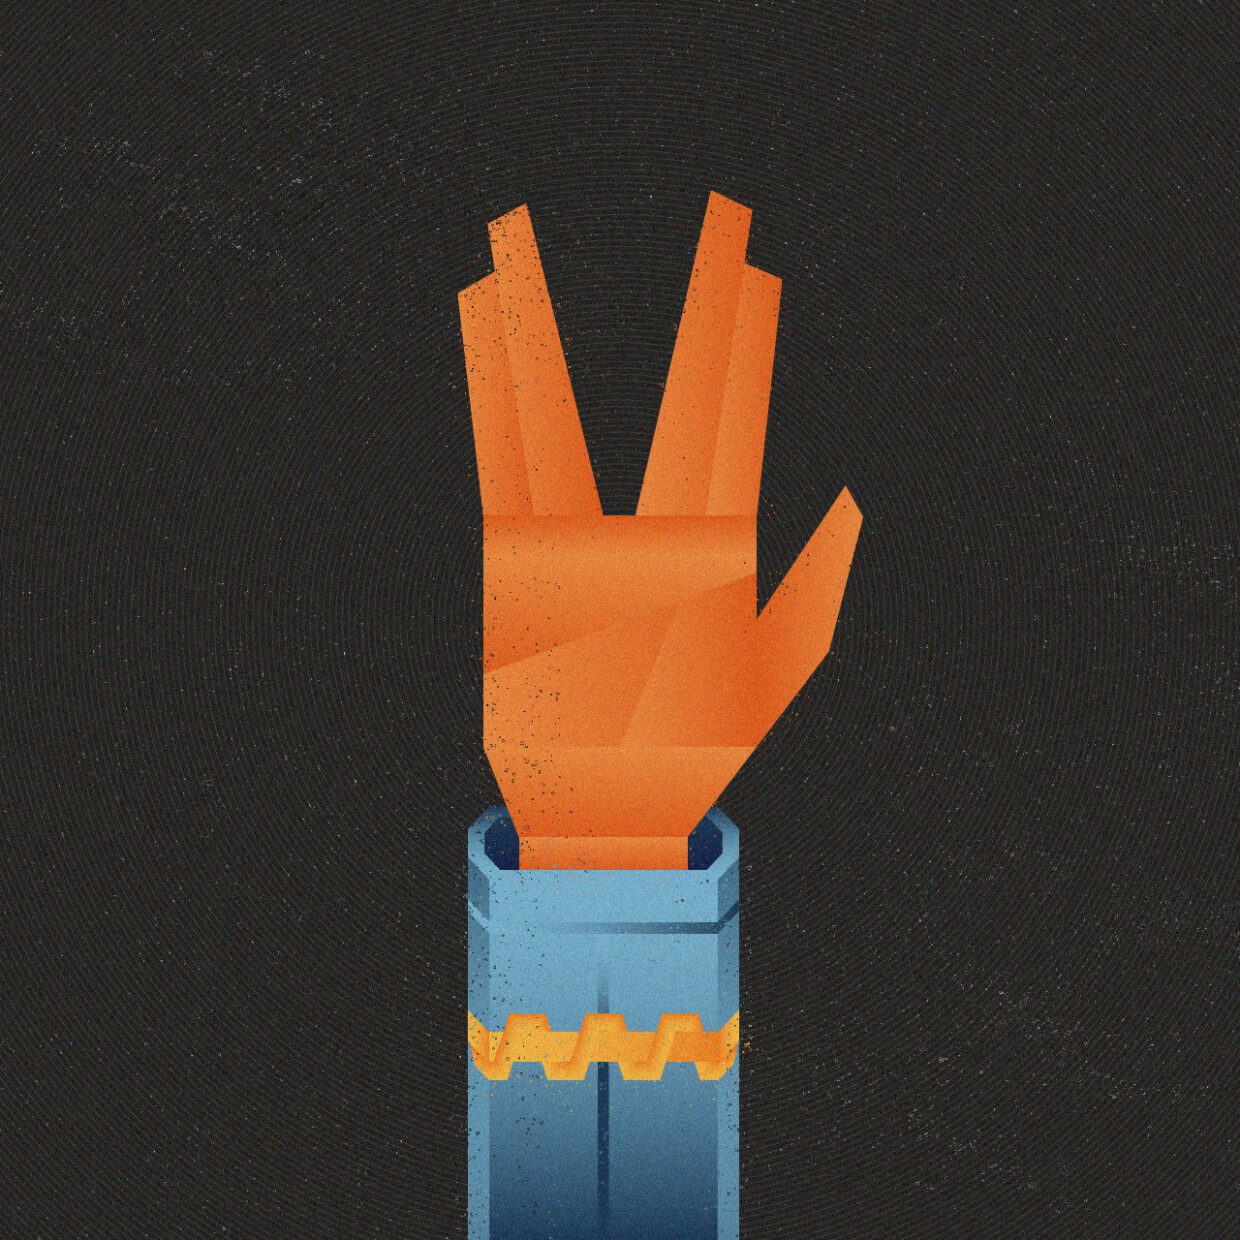 Illustration of a hand with the Vulcan salute symbolizing the letter V